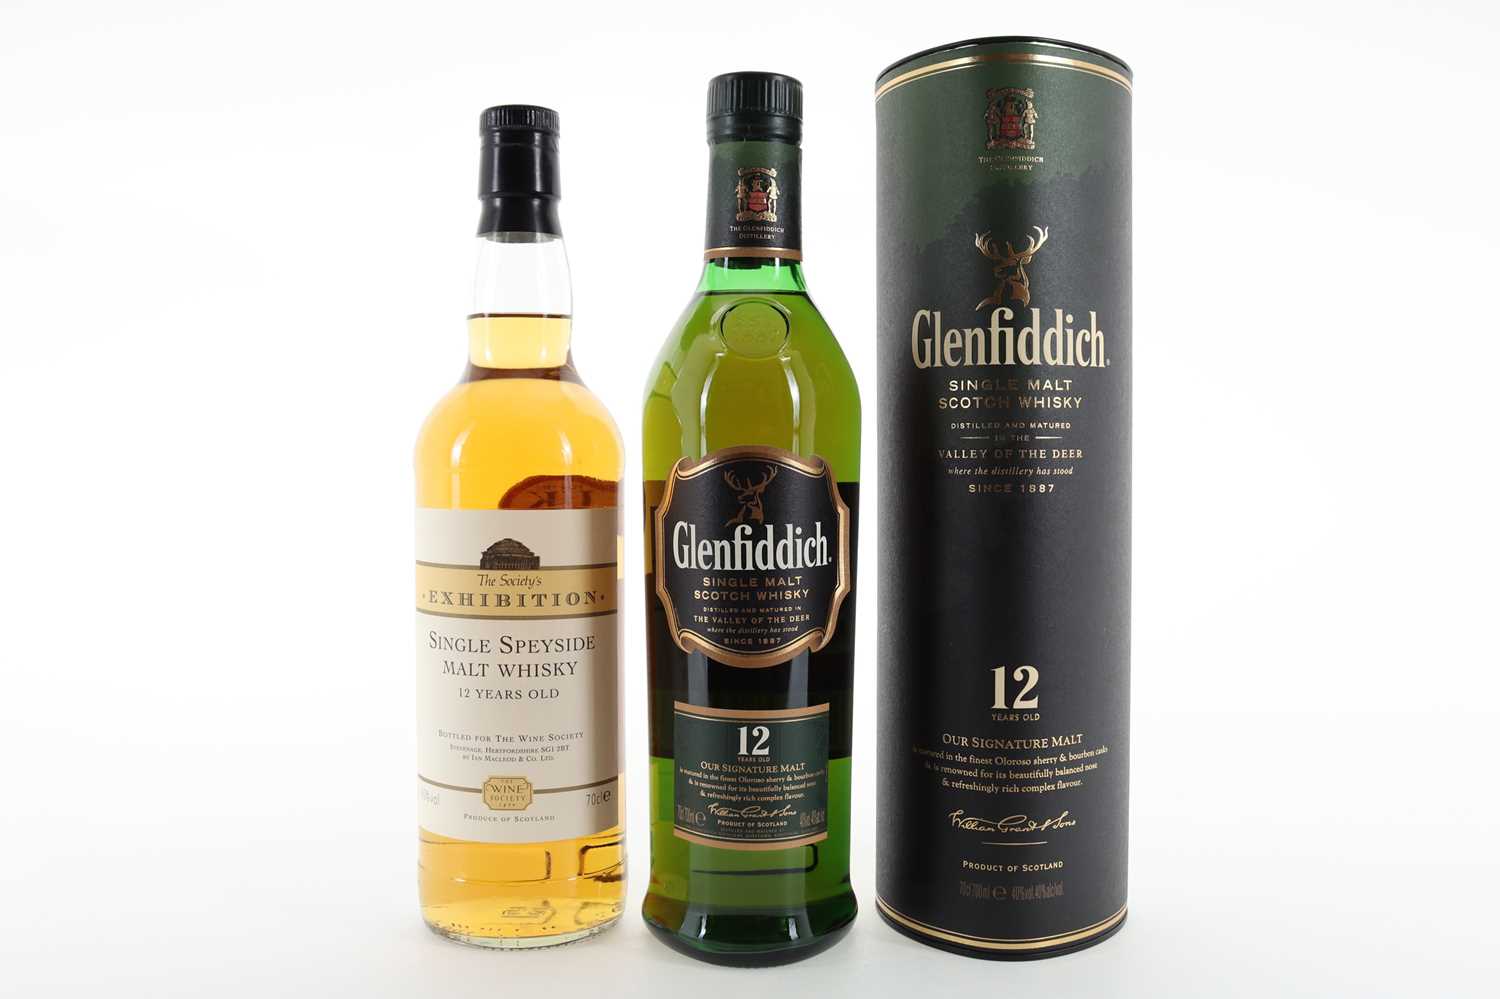 Lot 24 - GLENFIDDICH 12 YEAR OLD AND THE WINE SOCIETY SPEYSIDE 12 YEAR OLD